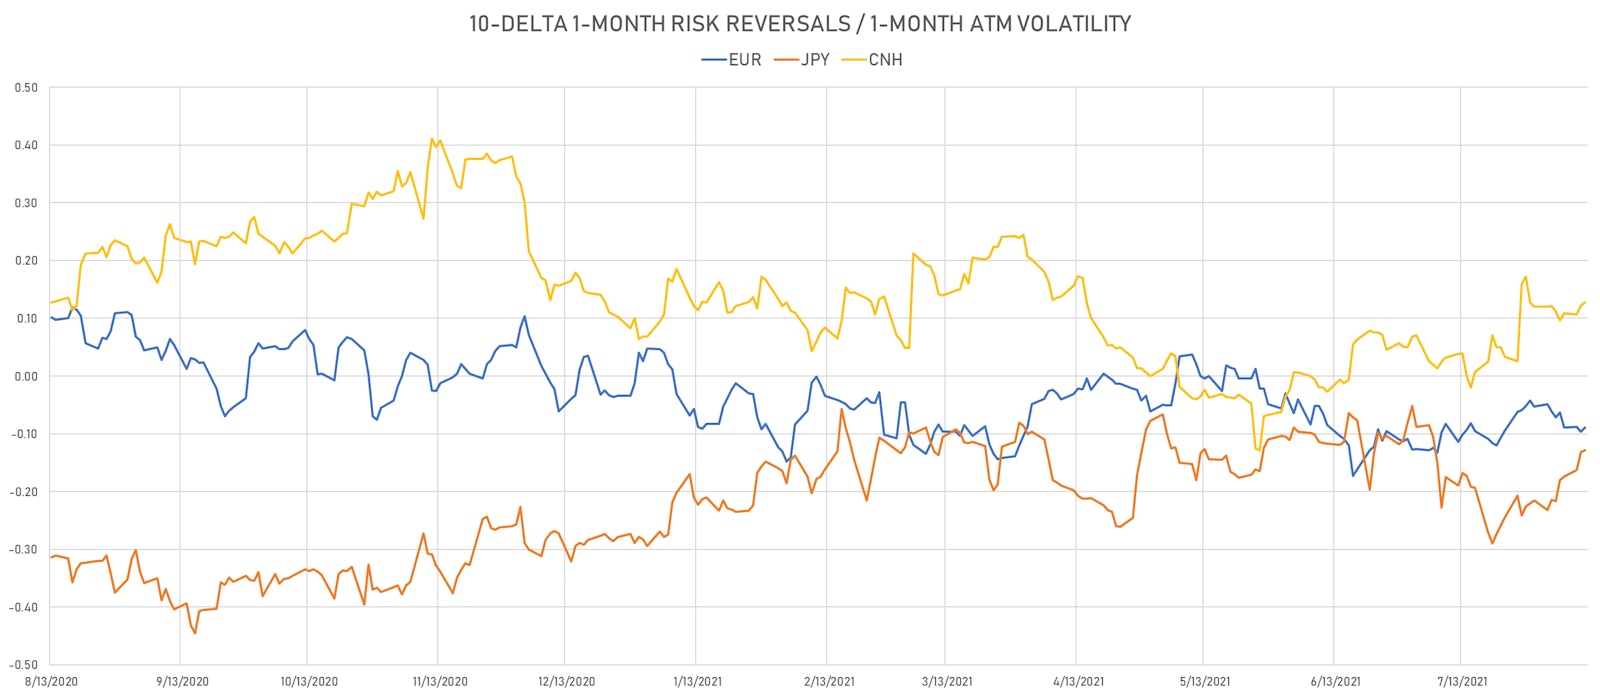 Euro, Offshore Yuan And Yen 1-Month 10-Delta Risk Reversals Not Showing Any Directional Bias | Sources: ϕpost, Refinitiv data